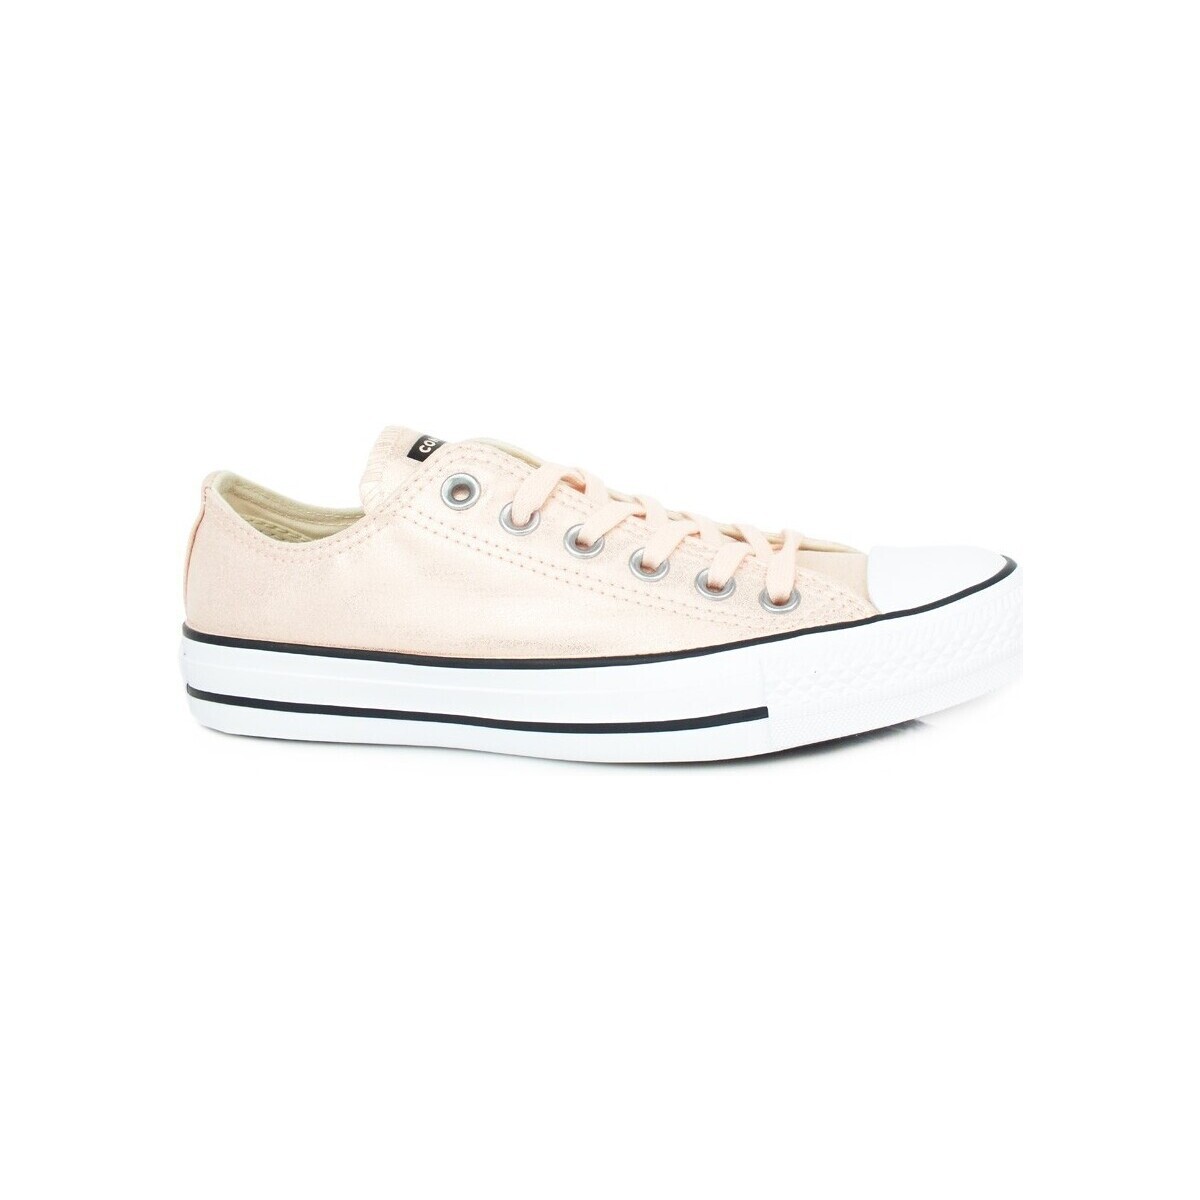 Chaussures Femme Bottes Converse C.T. All Star OX Coral White 563412C Rose